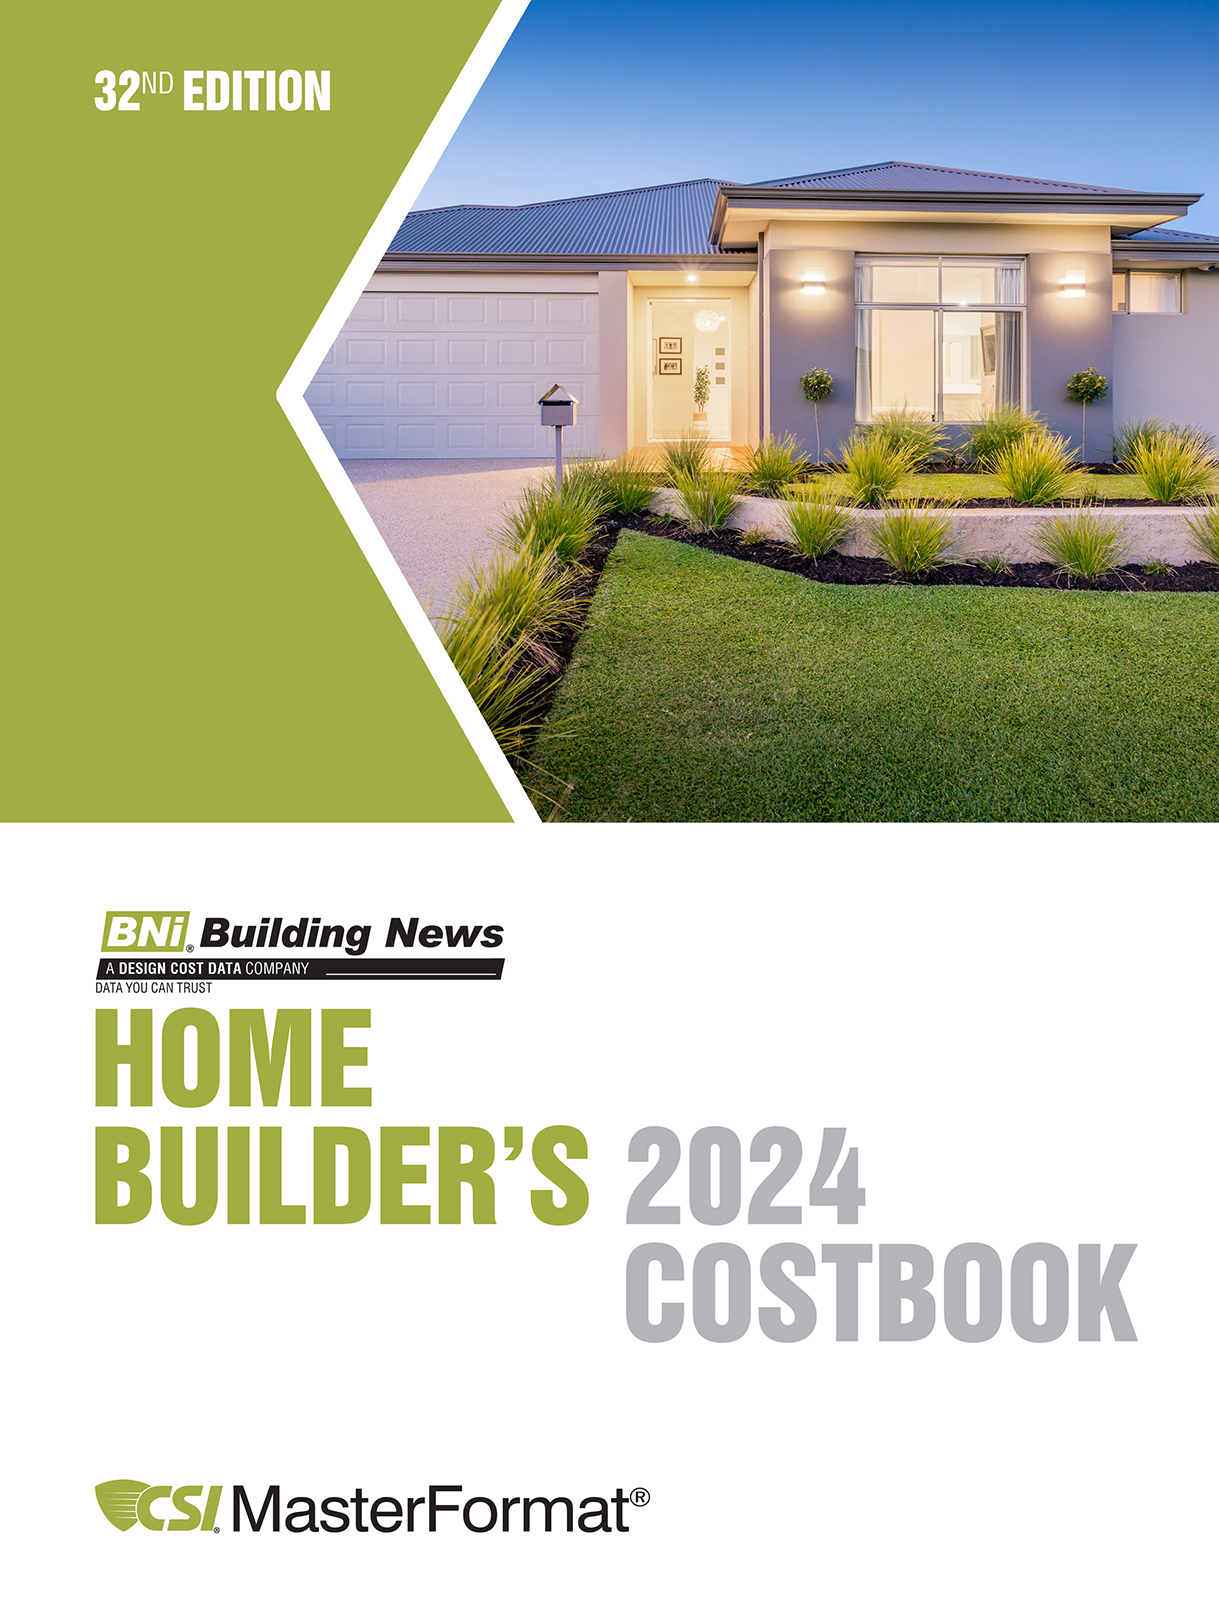 BNi Building News Home Builders Costbook 2024 (Print Edition